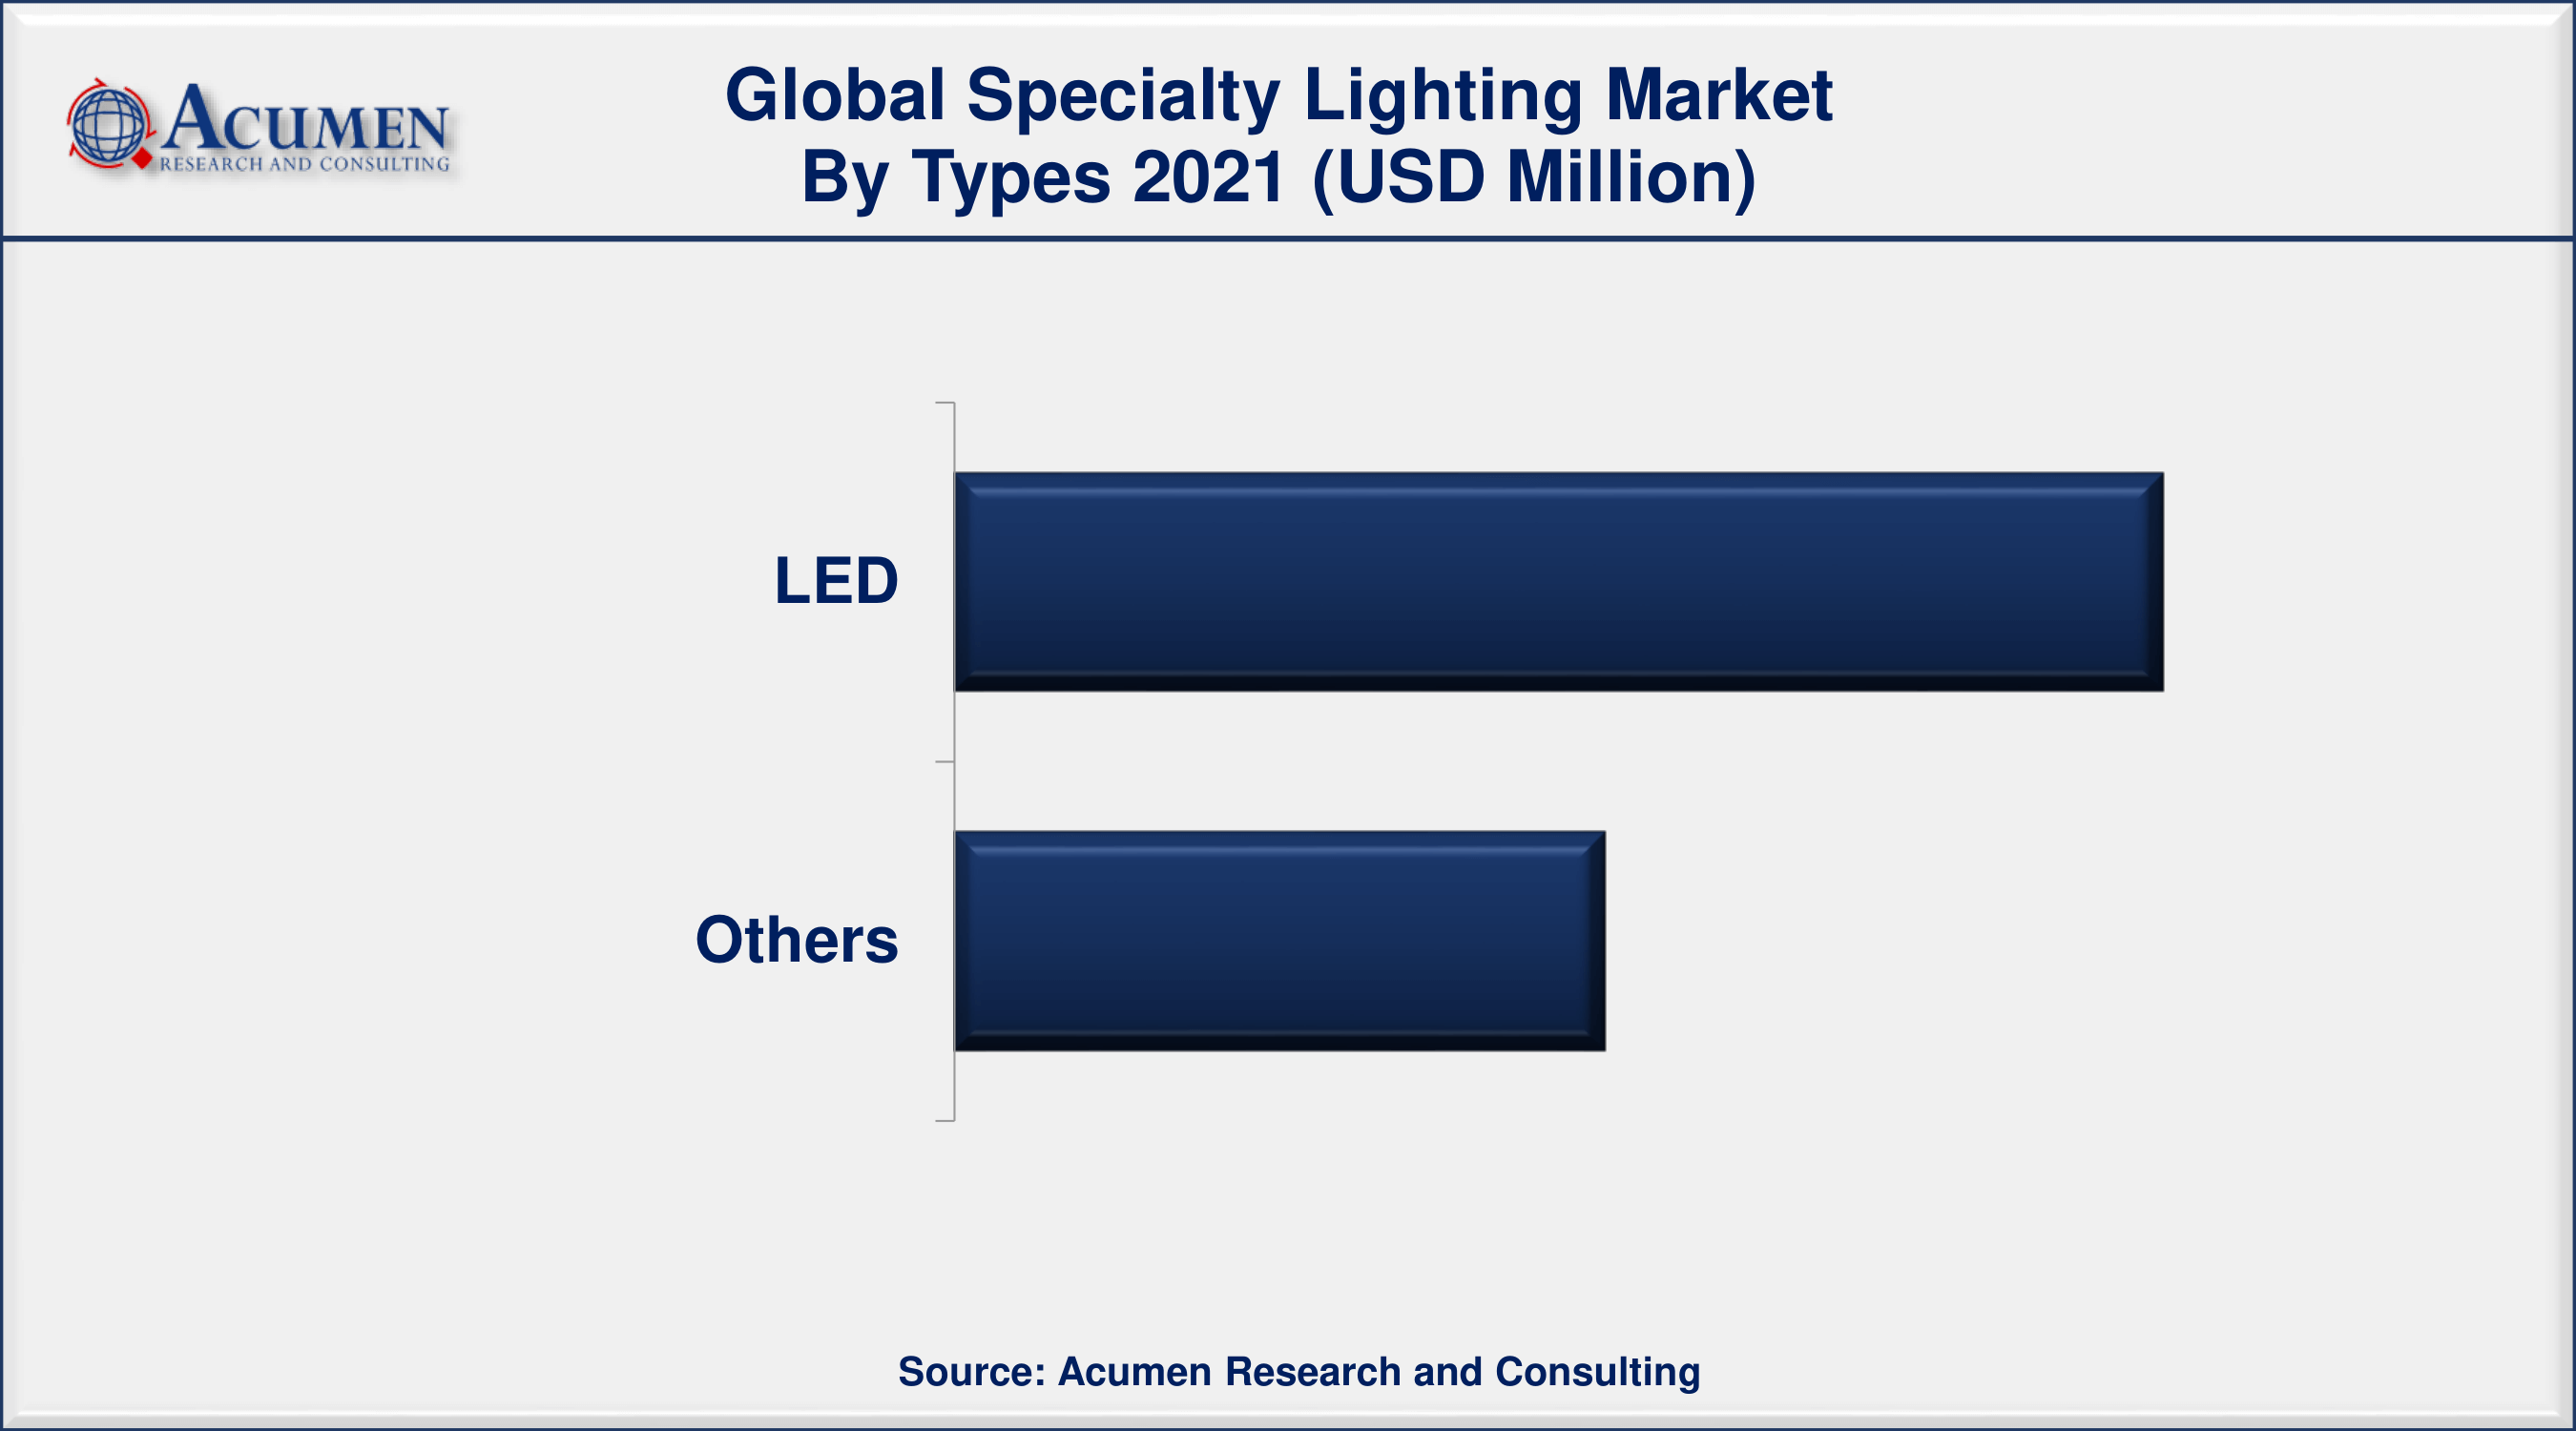 Among type, LED sector engaged more than 65% of the total market share